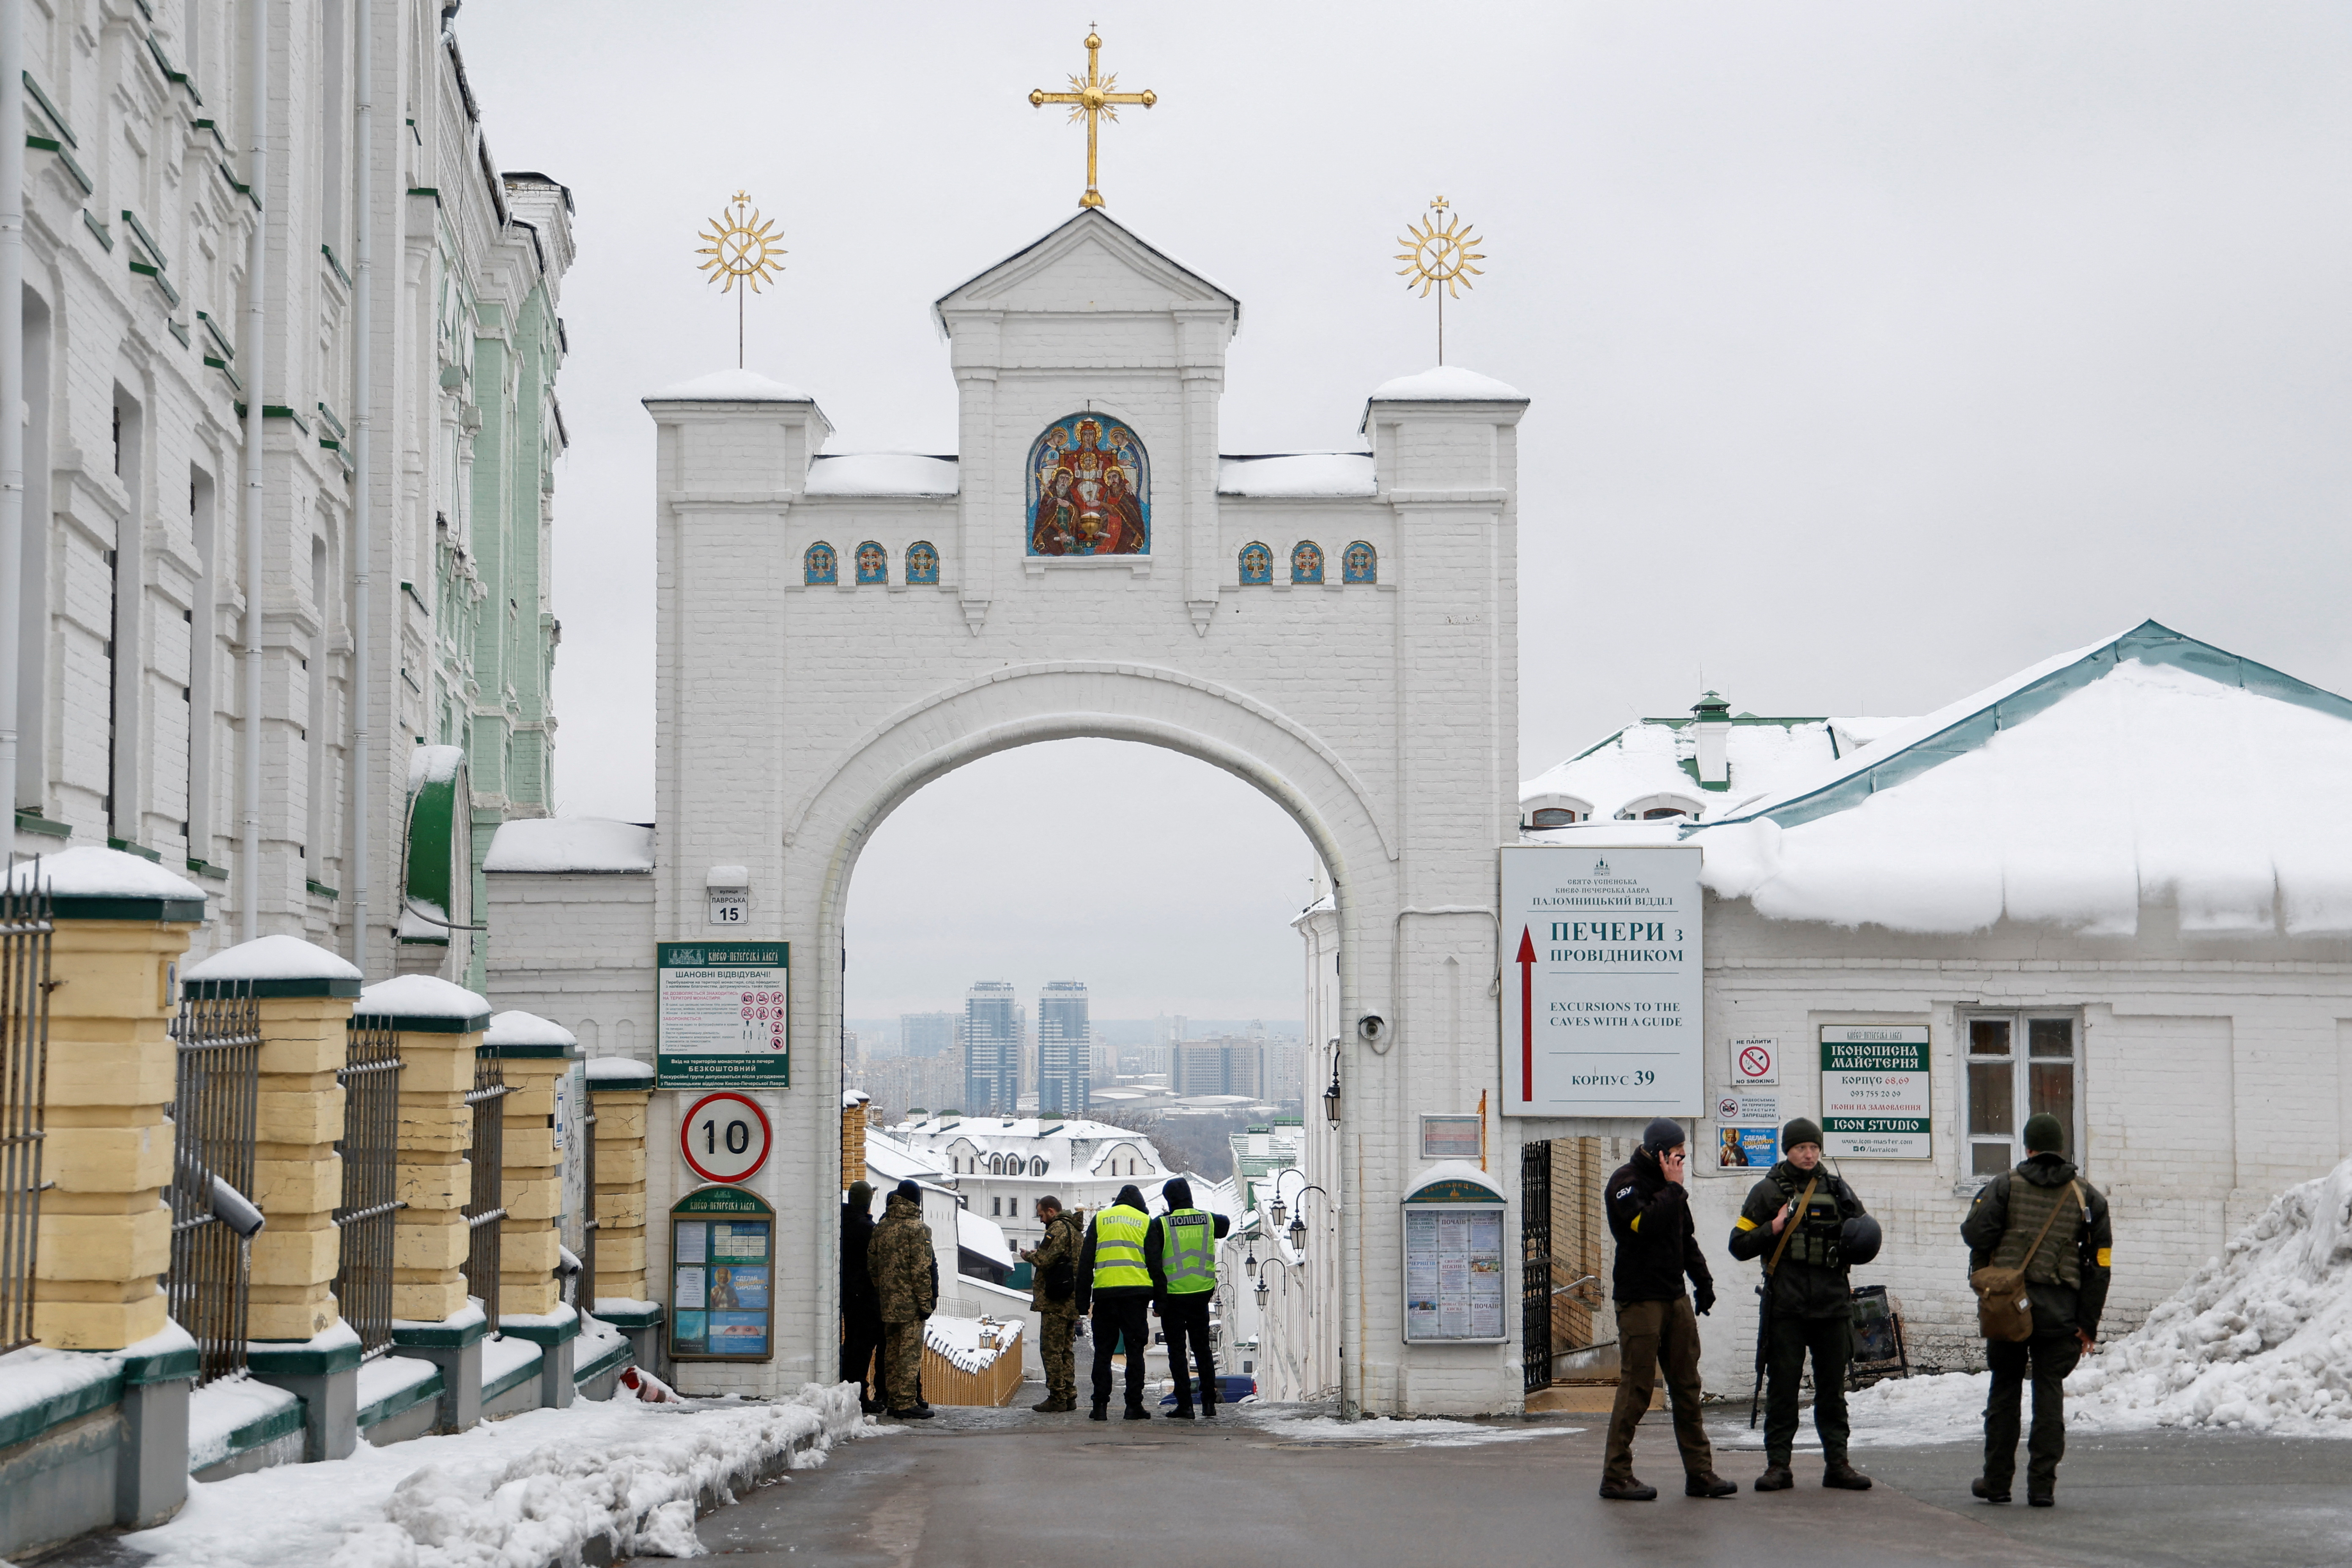 Ukrainian law enforcement officers stand next to an entrance to the Kyiv Pechersk Lavra monastery compound in Kyiv